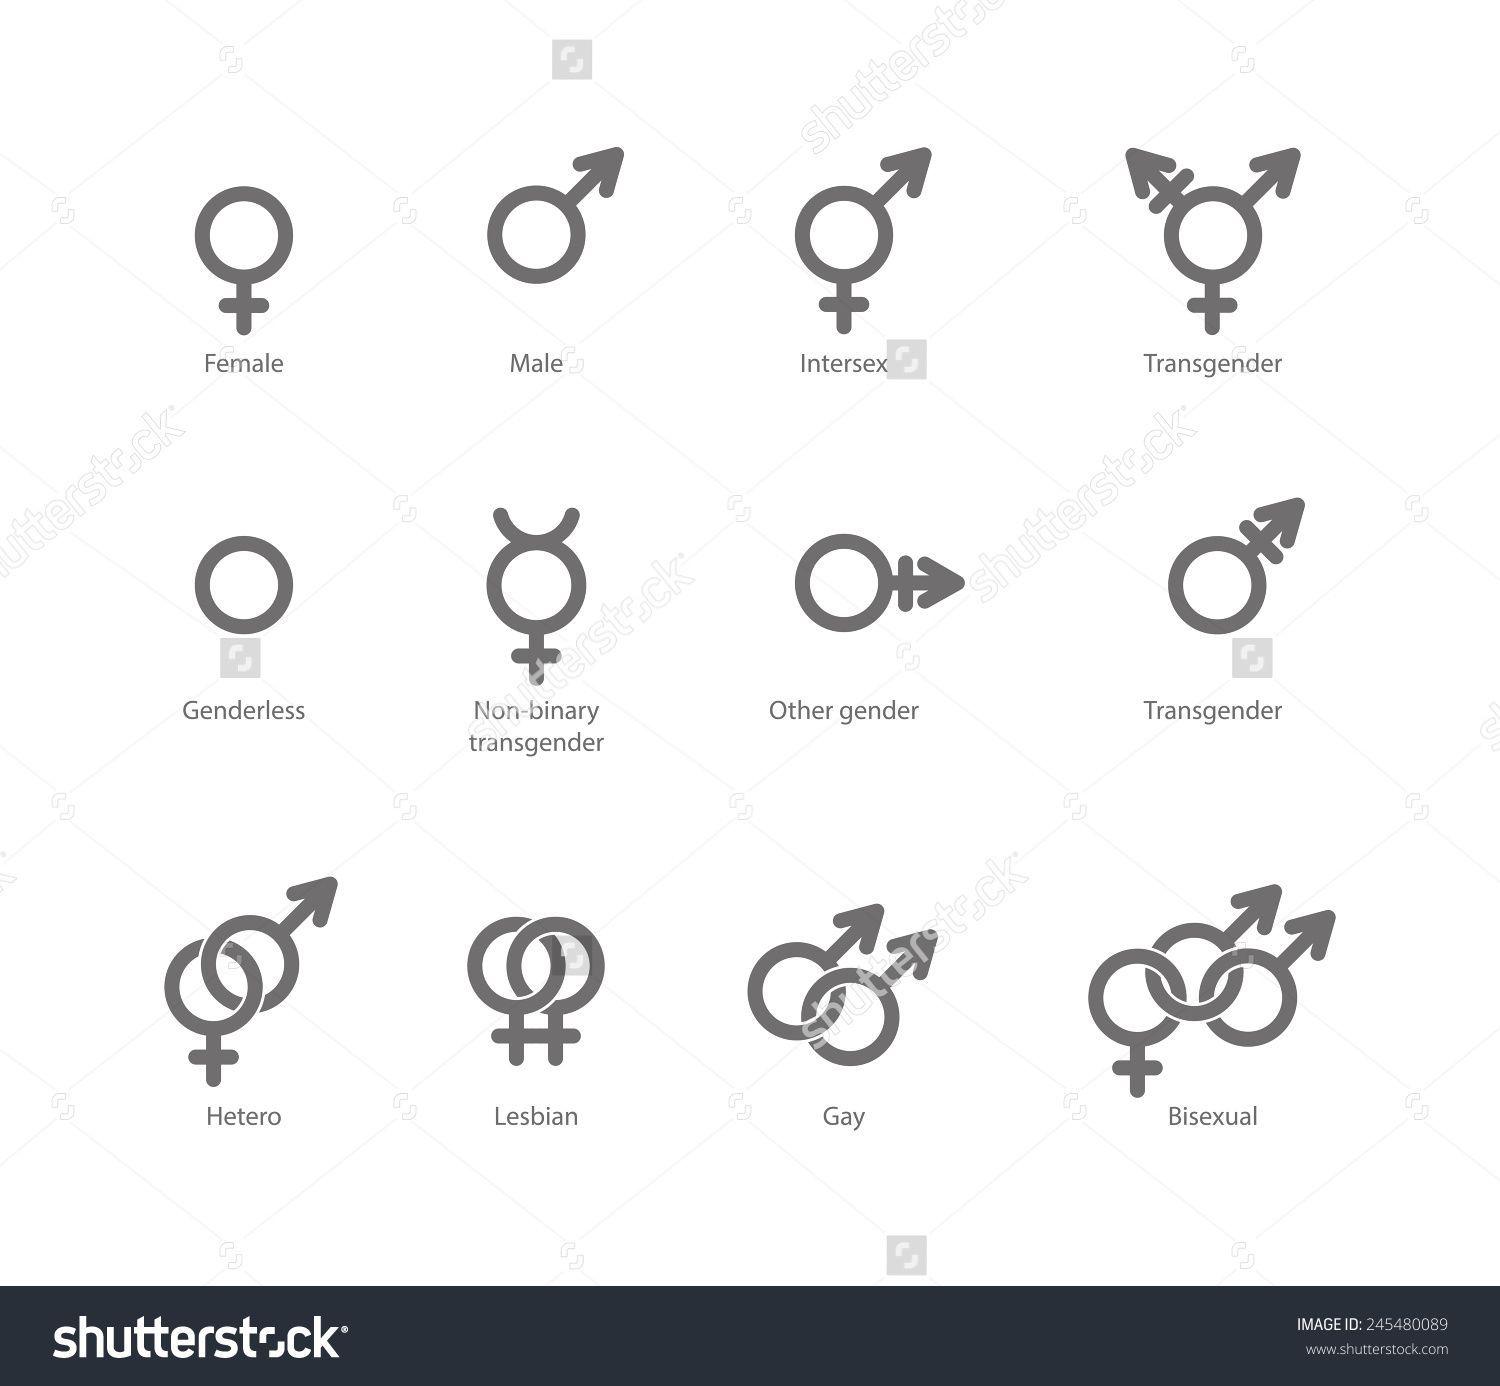 Male Logo - Vector Outlines Icon Of Gender Symbols And Combinations. Male